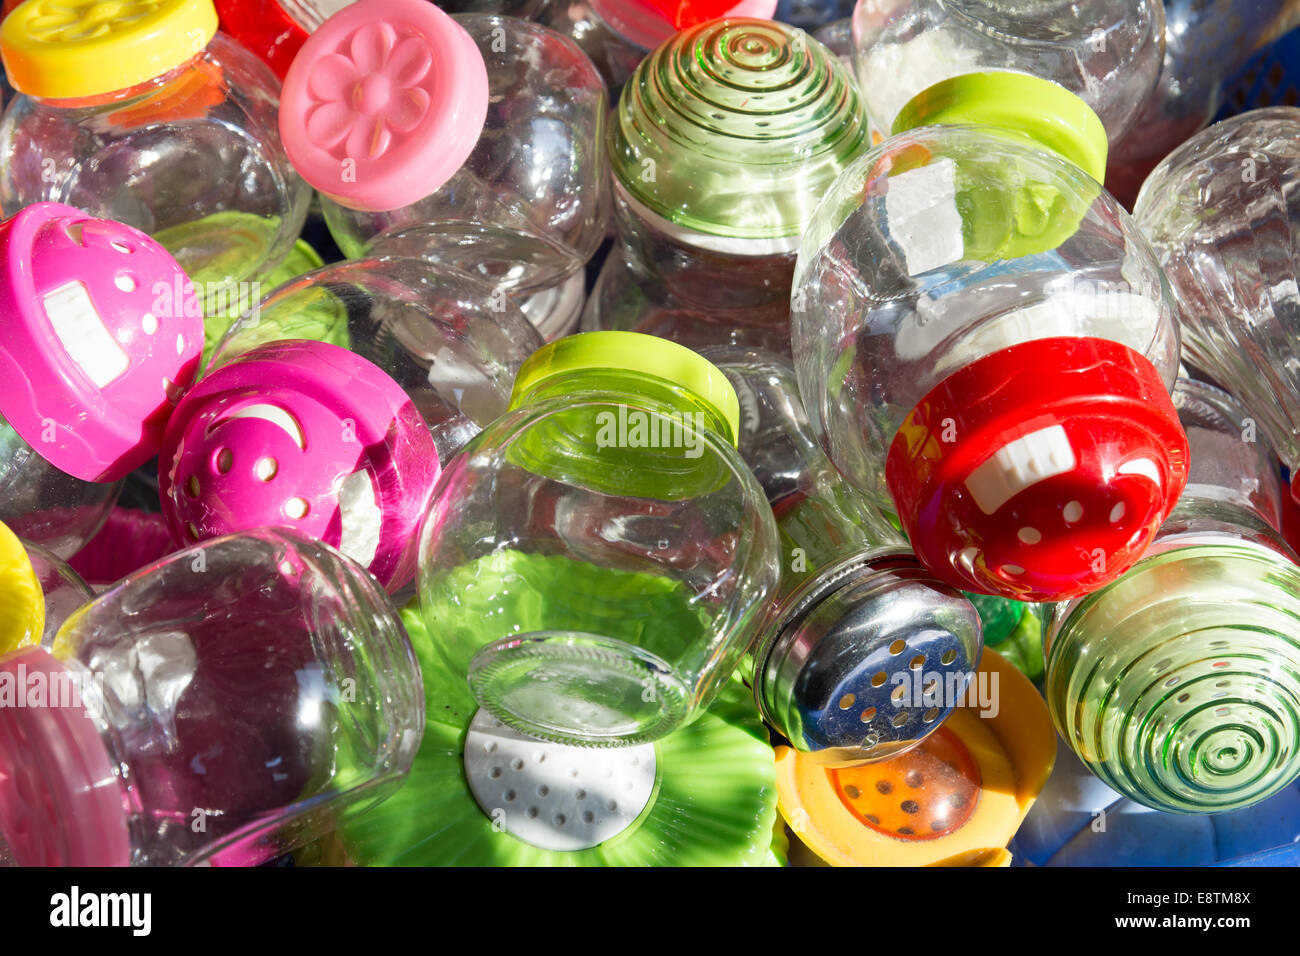 A selection of glass jars with a variety of brightly coloured colored lids for sale at the Souk El Had, Agadir, Morocco. Stock Photo